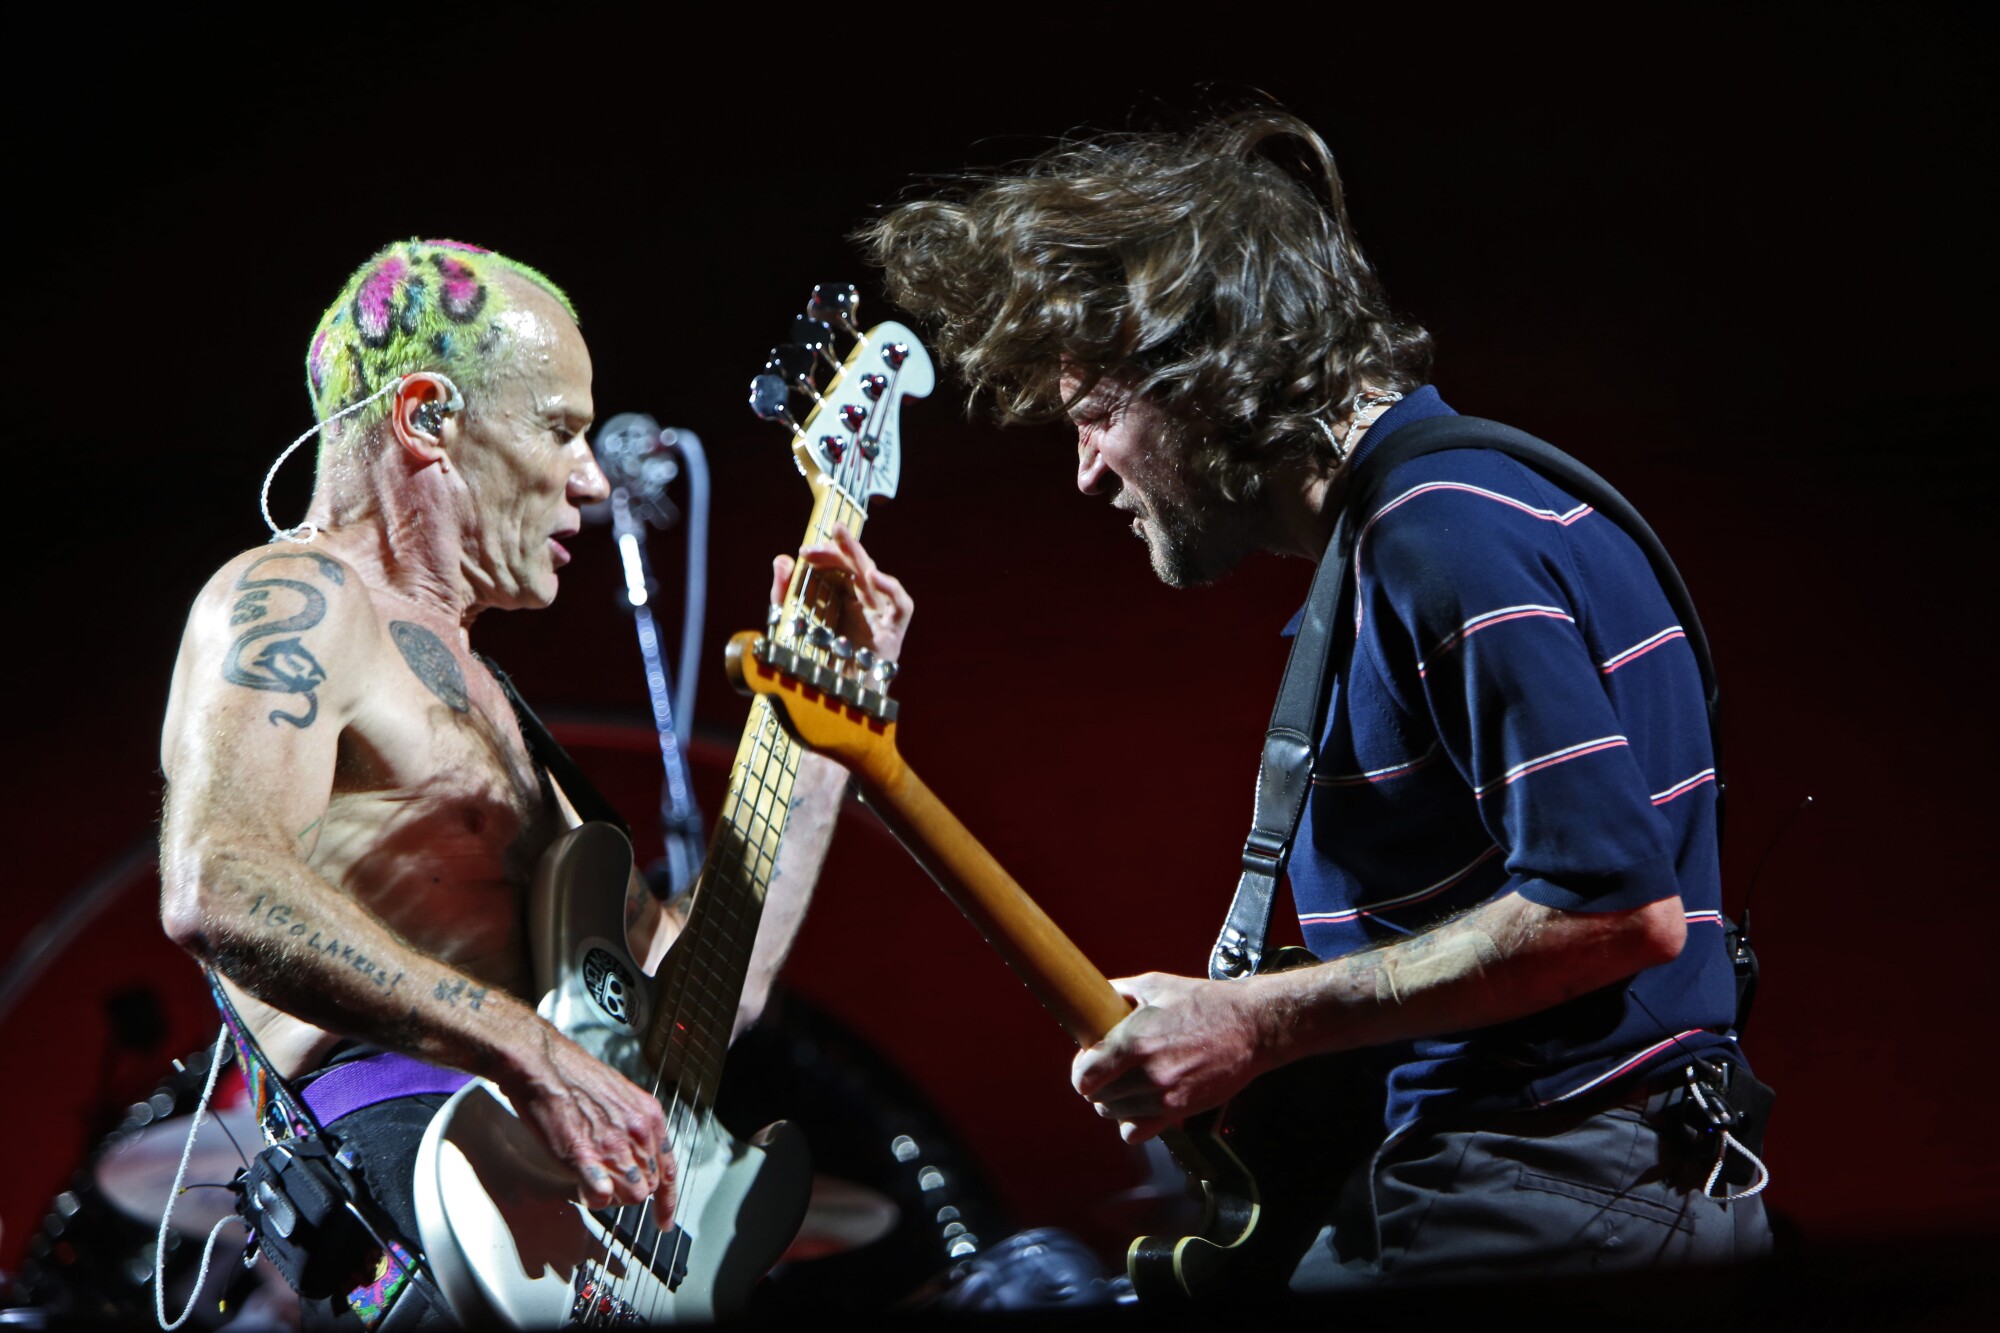 Red Hot Chili Peppers continue their Global Stadium Tour